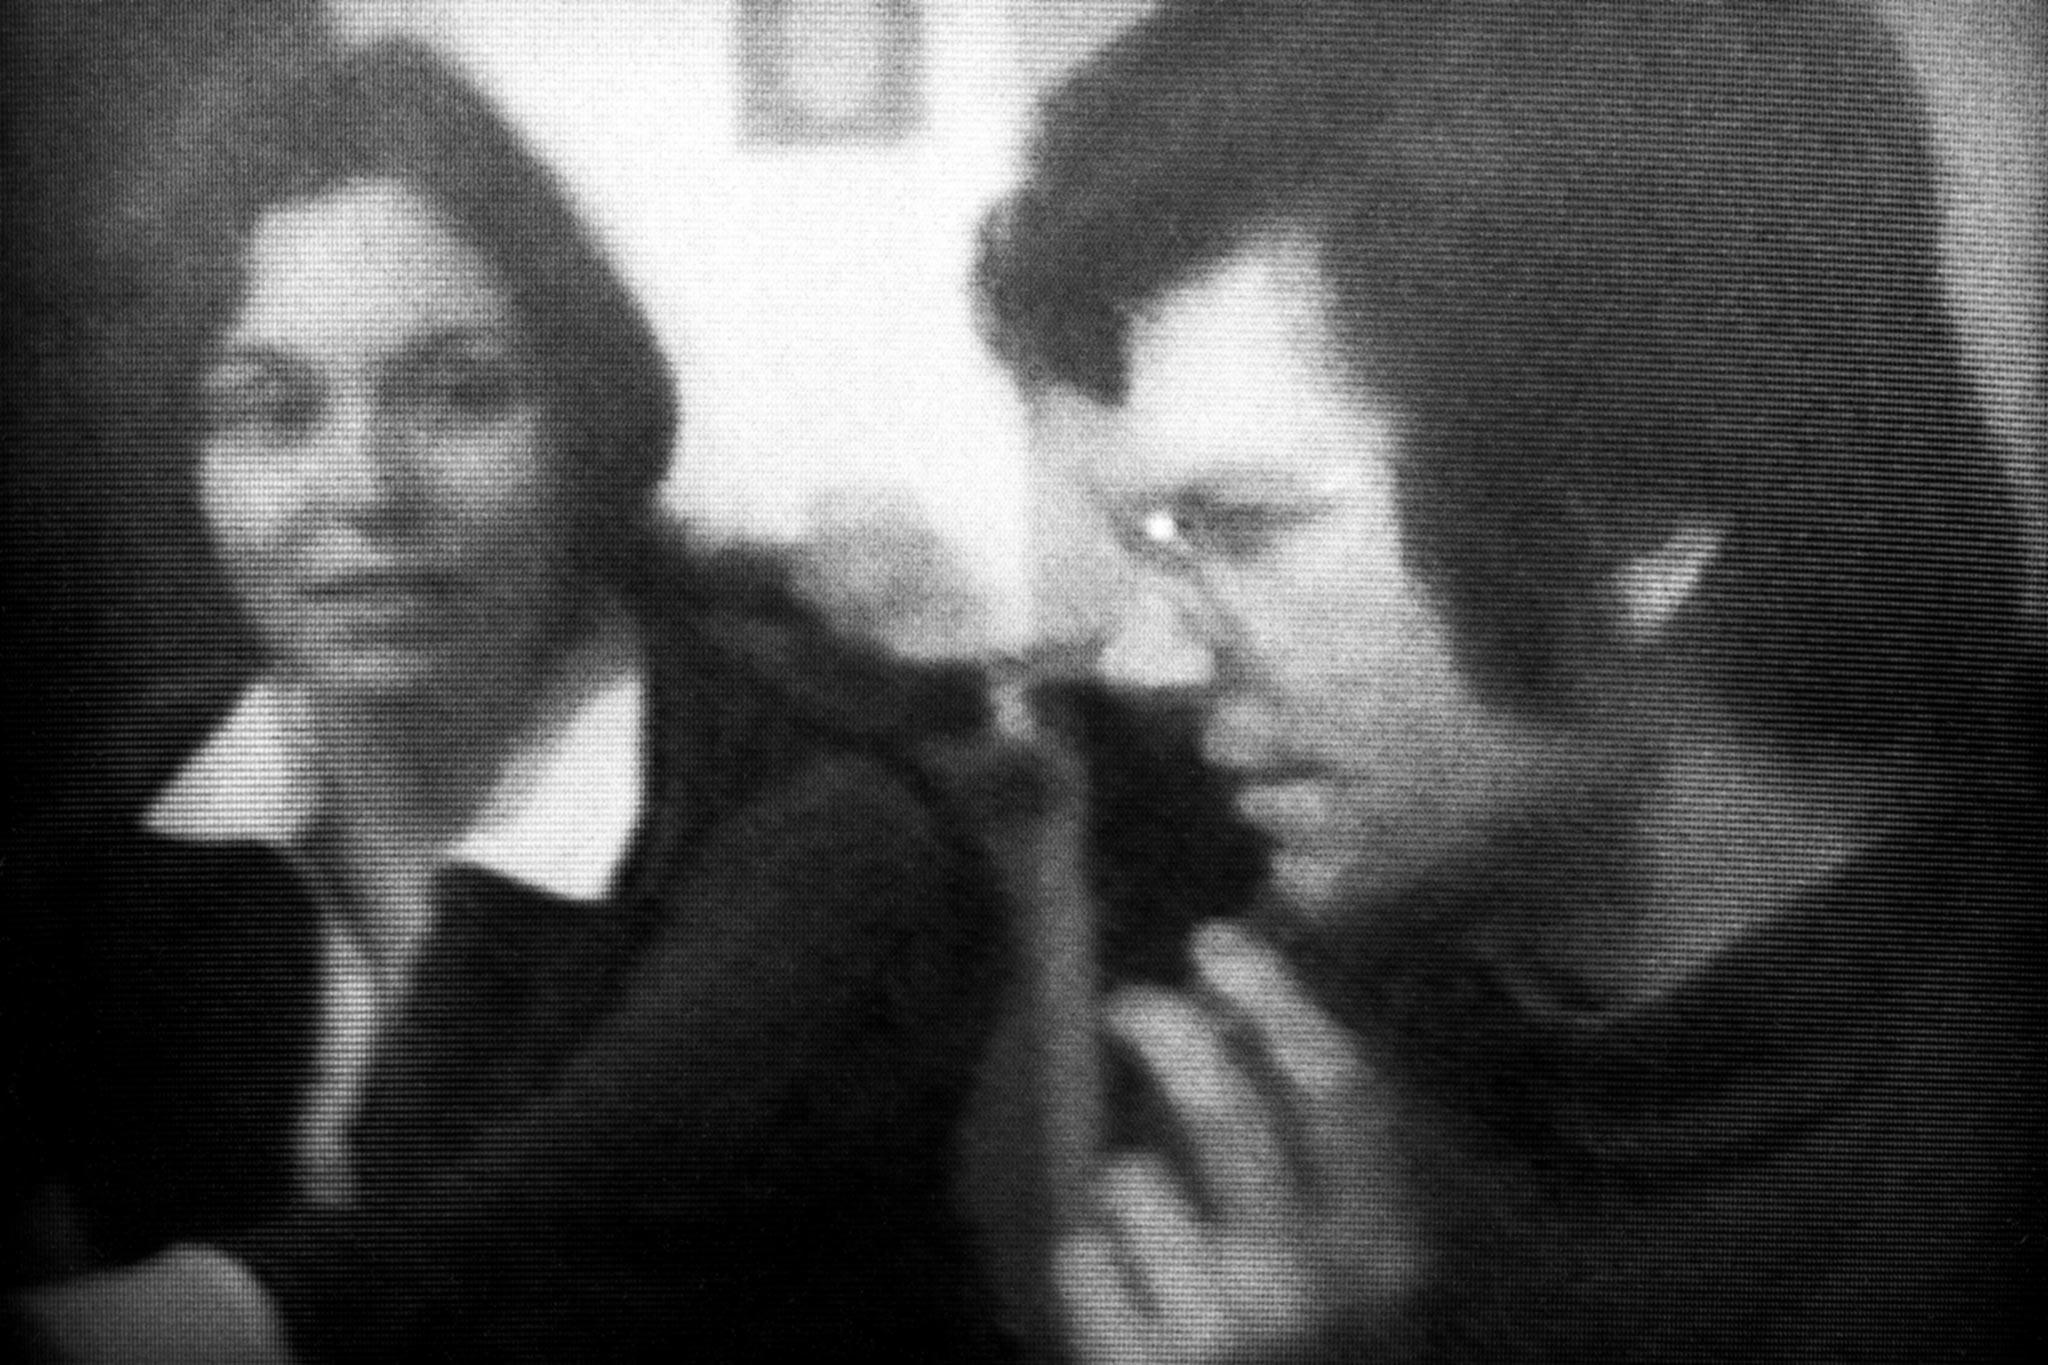 black and white film image of a close up of a man and woman in conversation.